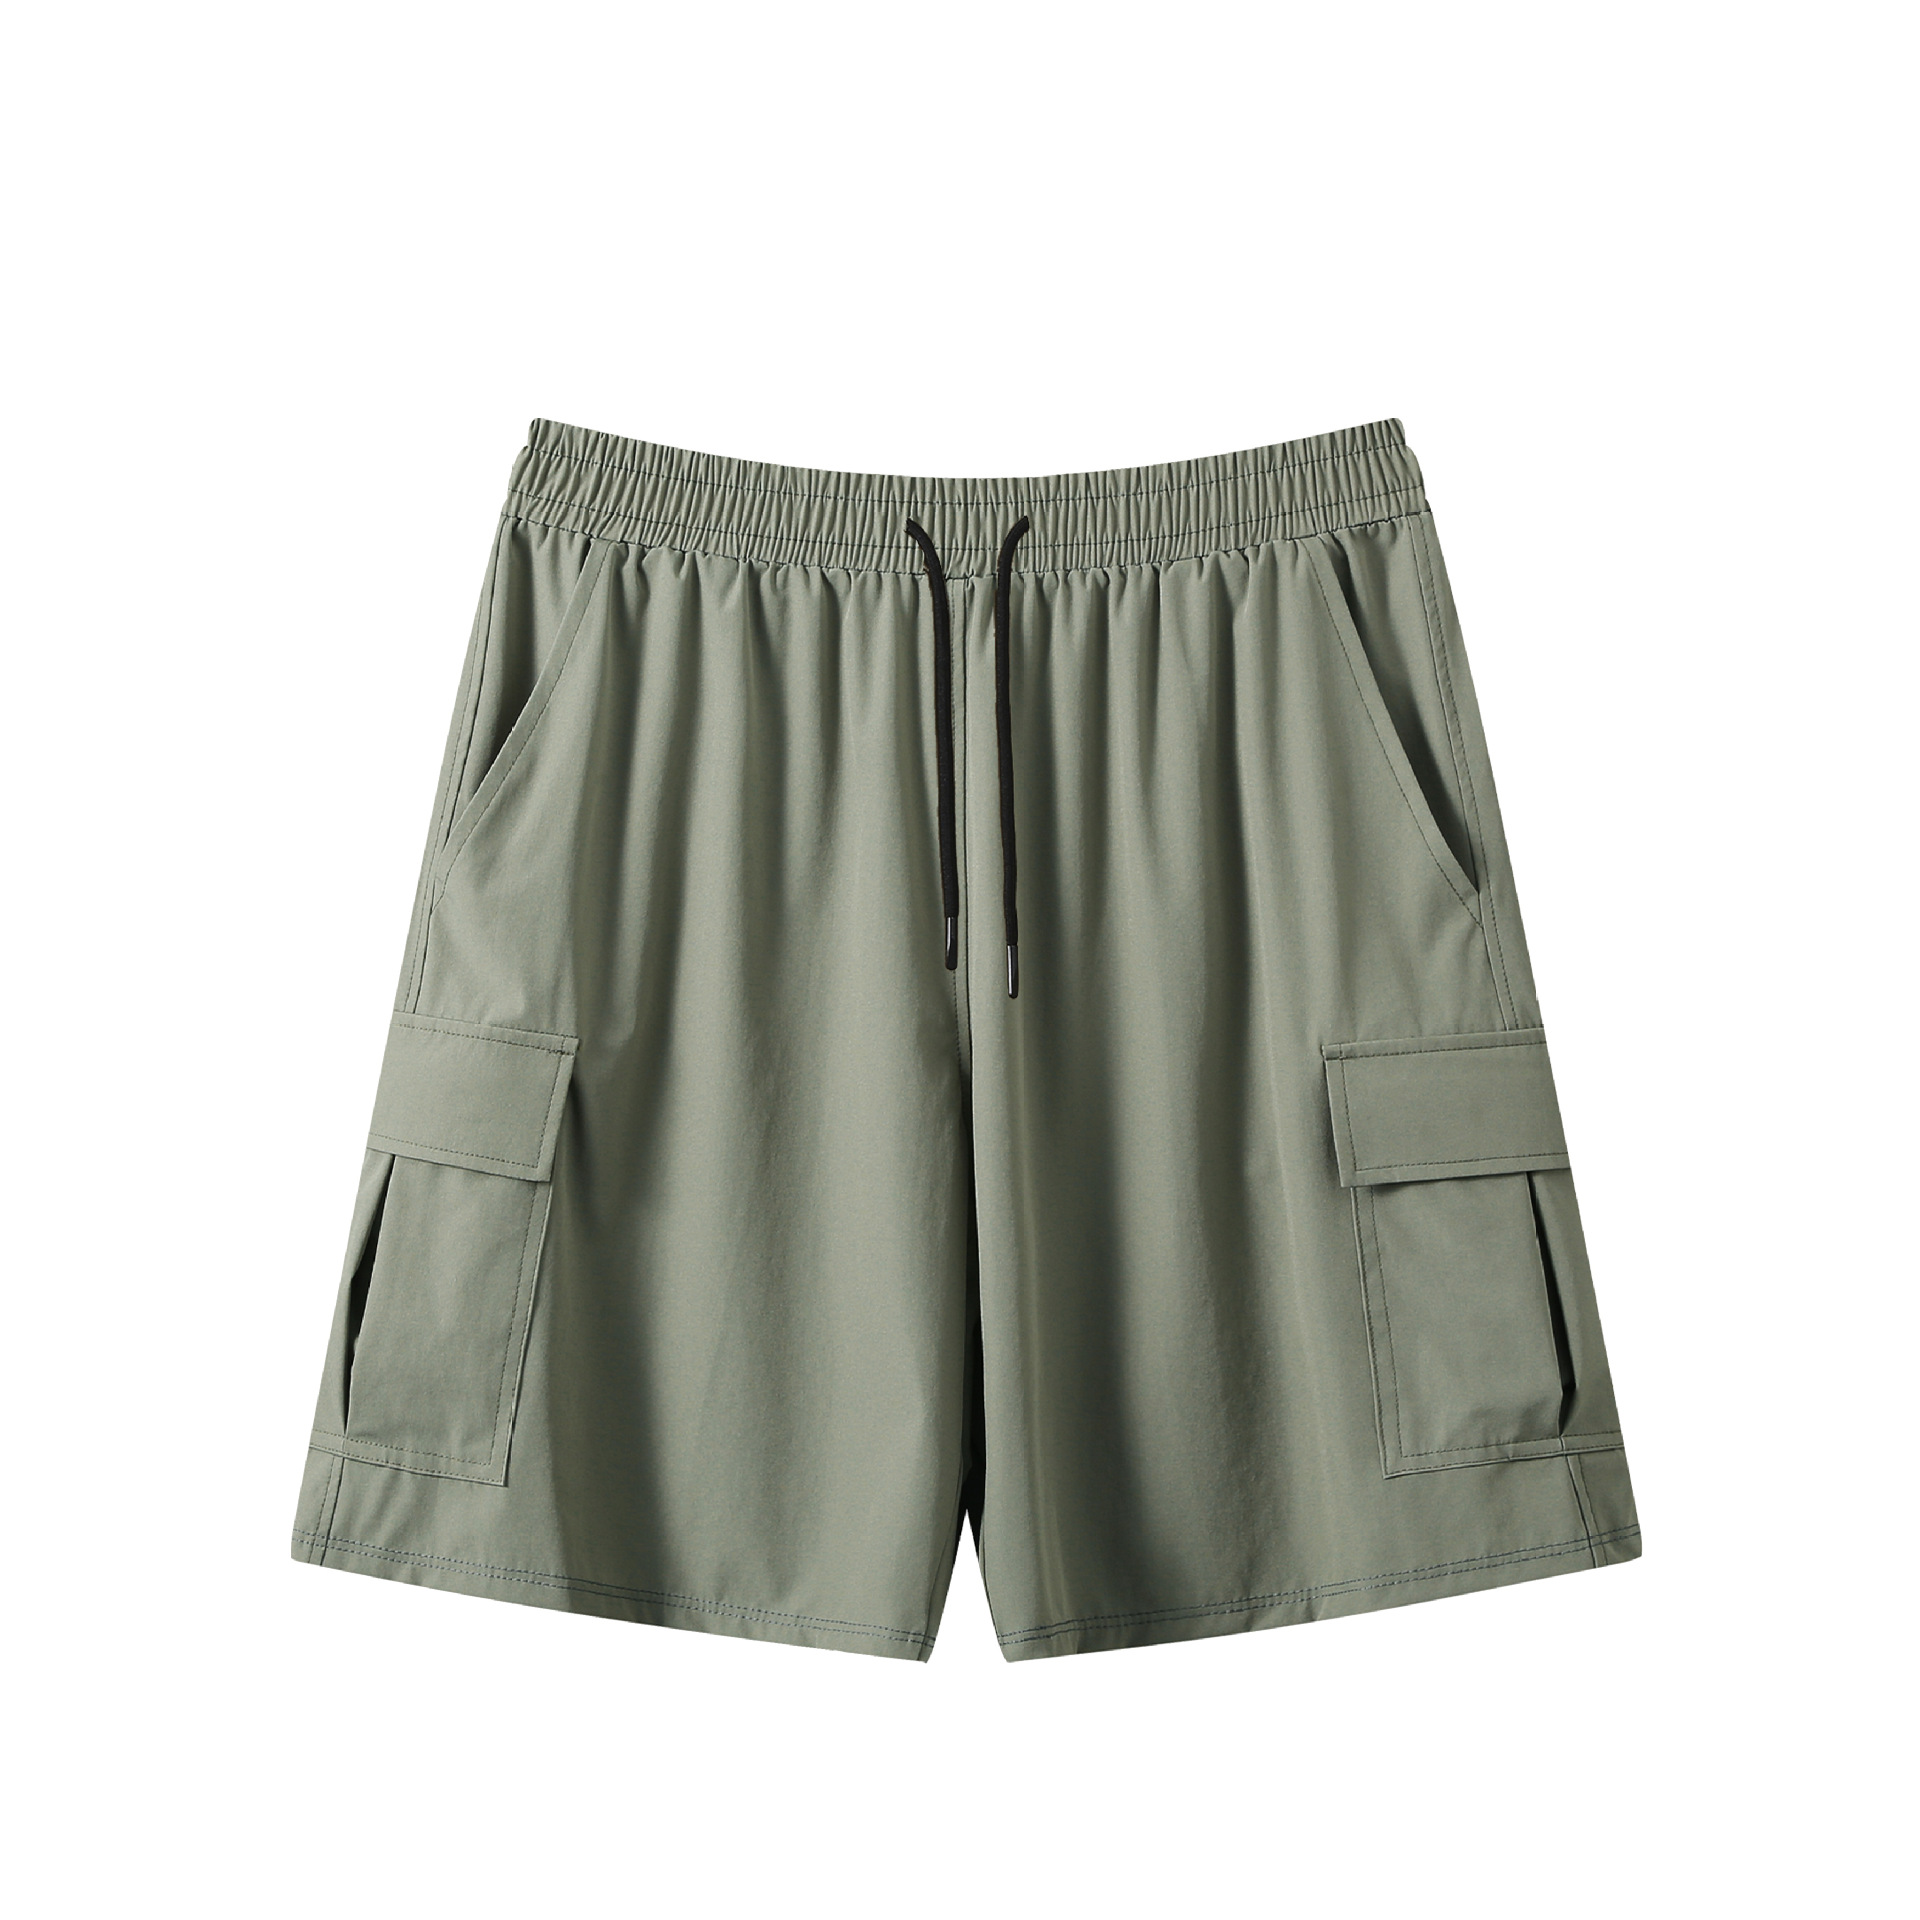 Men's Casual Athletic Mid-Length Shorts for Running, Training, and Fitness